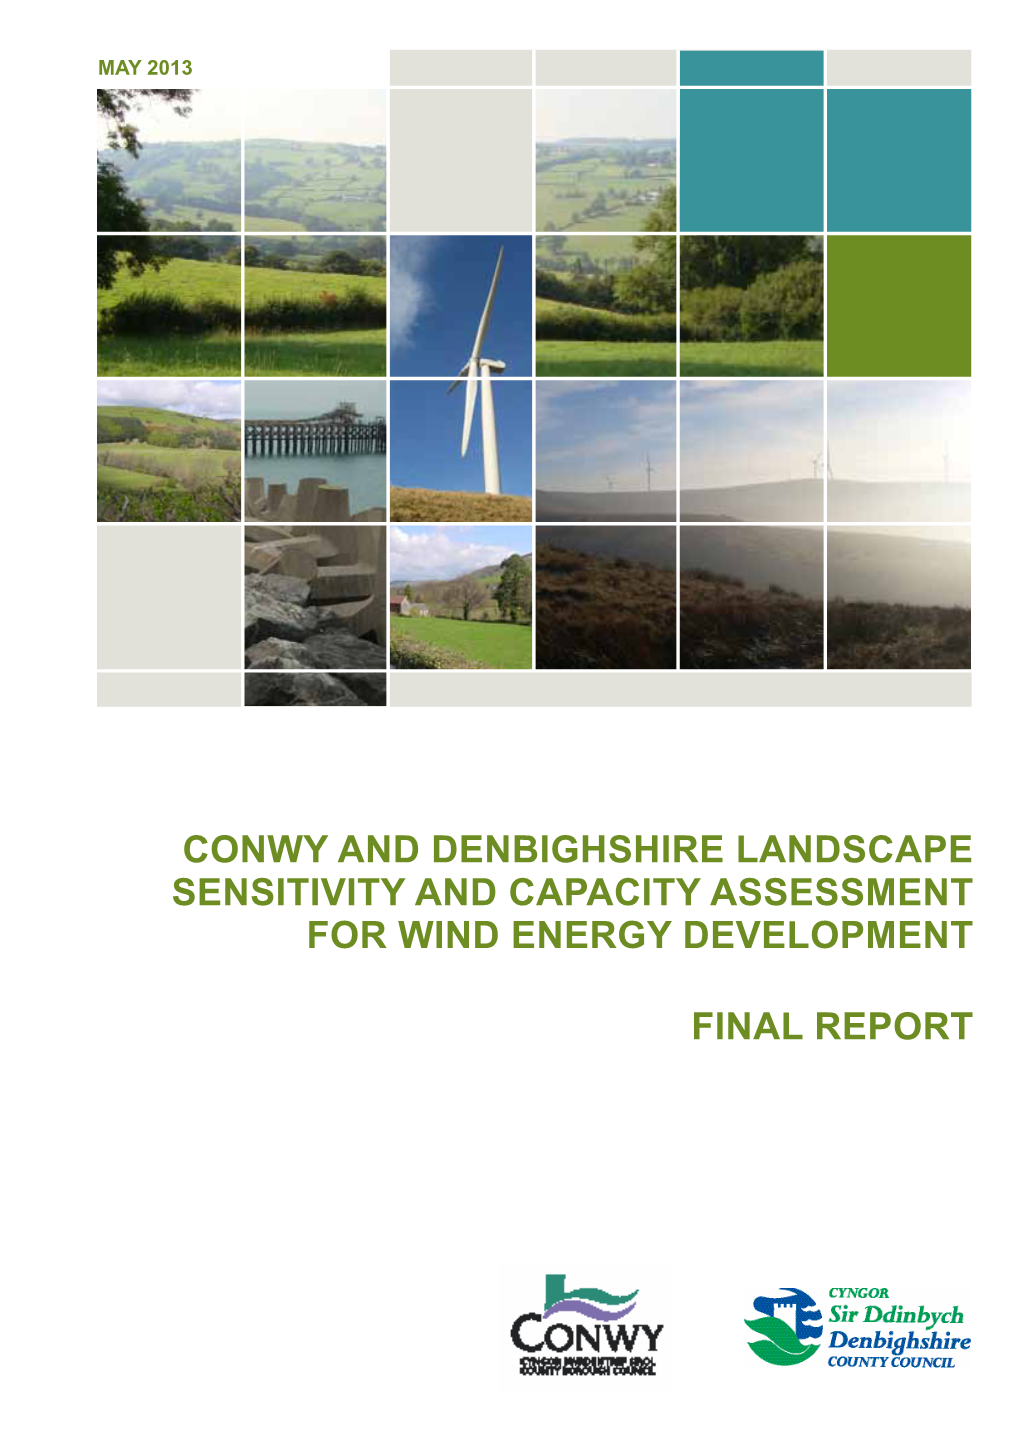 Conwy and Denbighshire Landscape Sensitivity and Capacity Assessment for Wind Energy Development